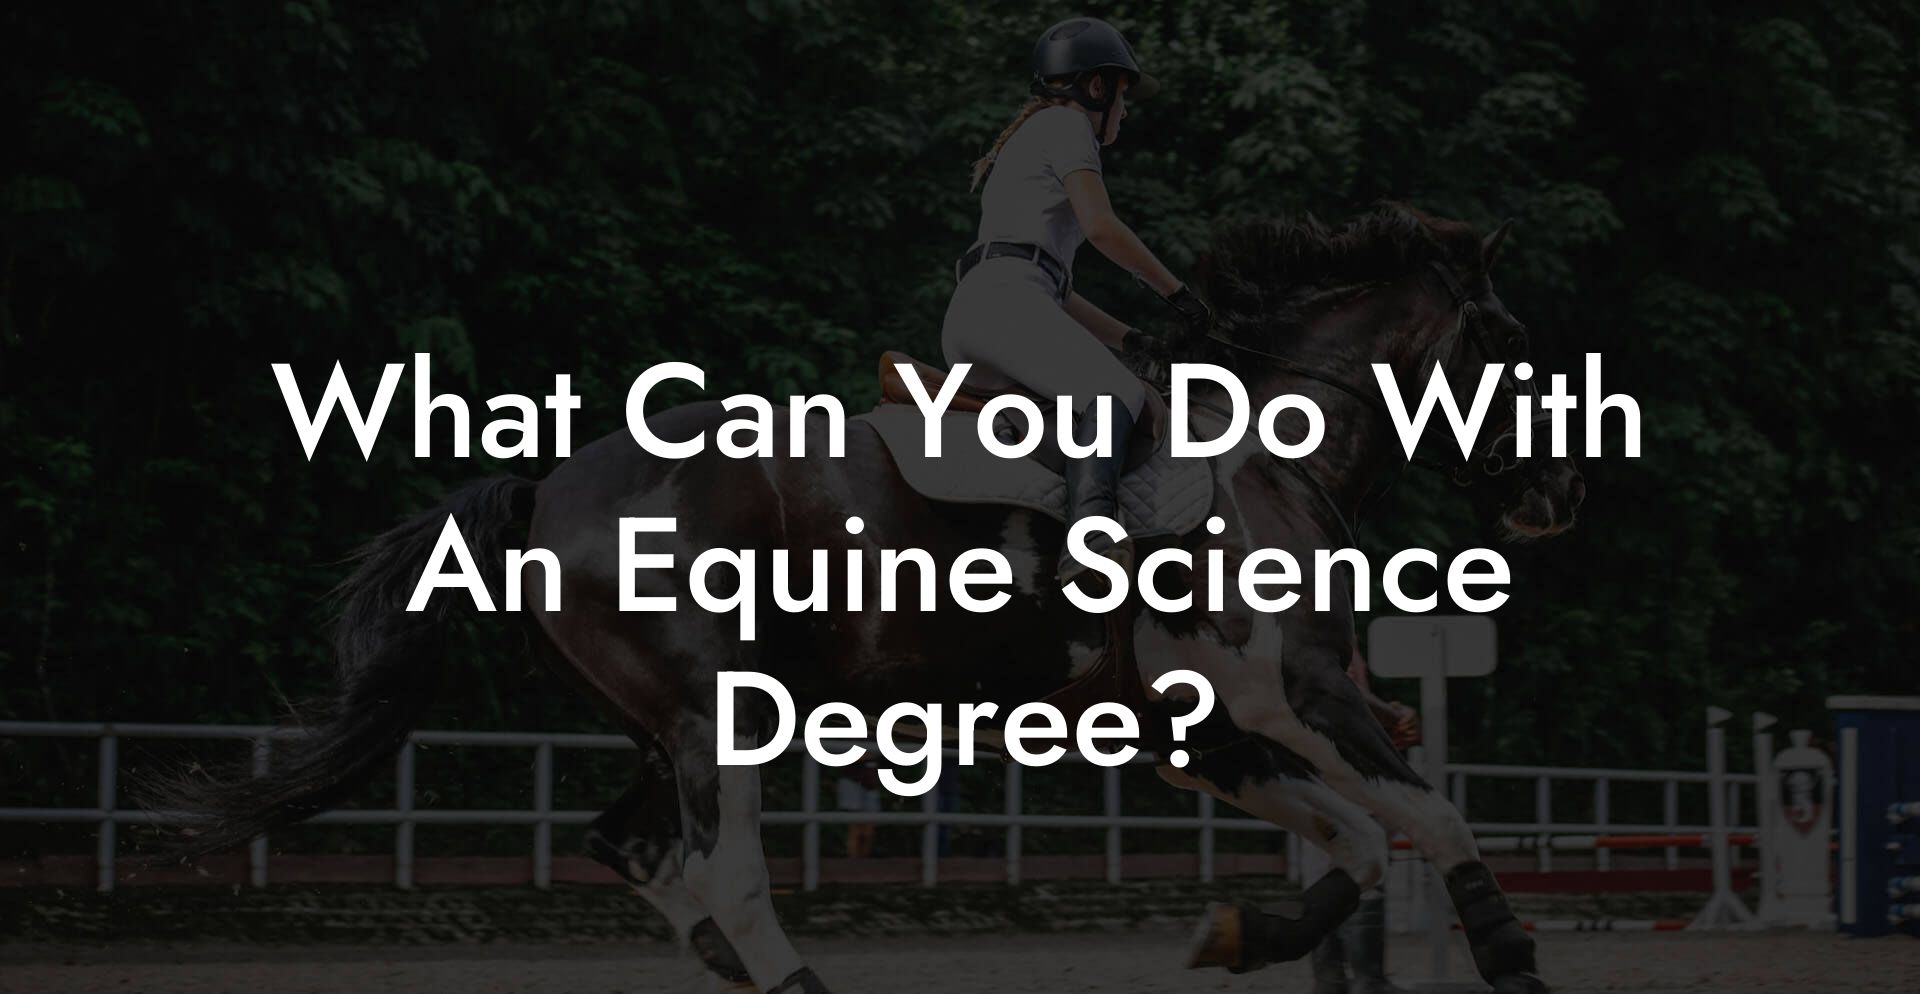 What Can You Do With An Equine Science Degree?